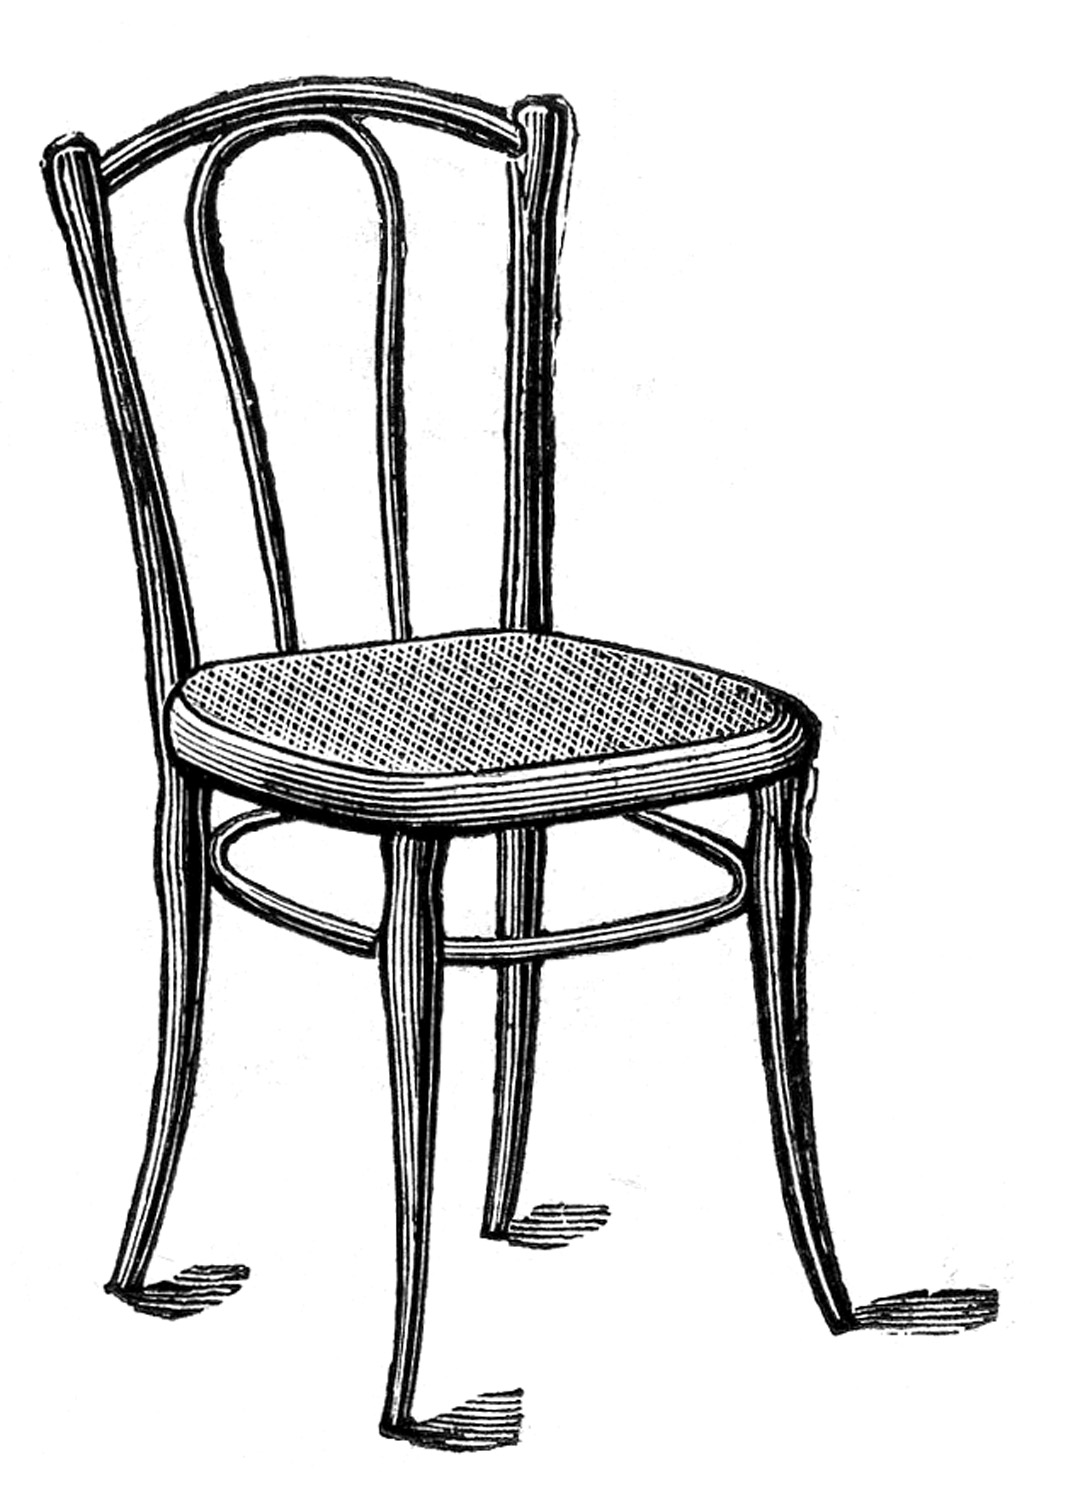 Antique Images   Caned Bentwood Chairs   The Graphics Fairy